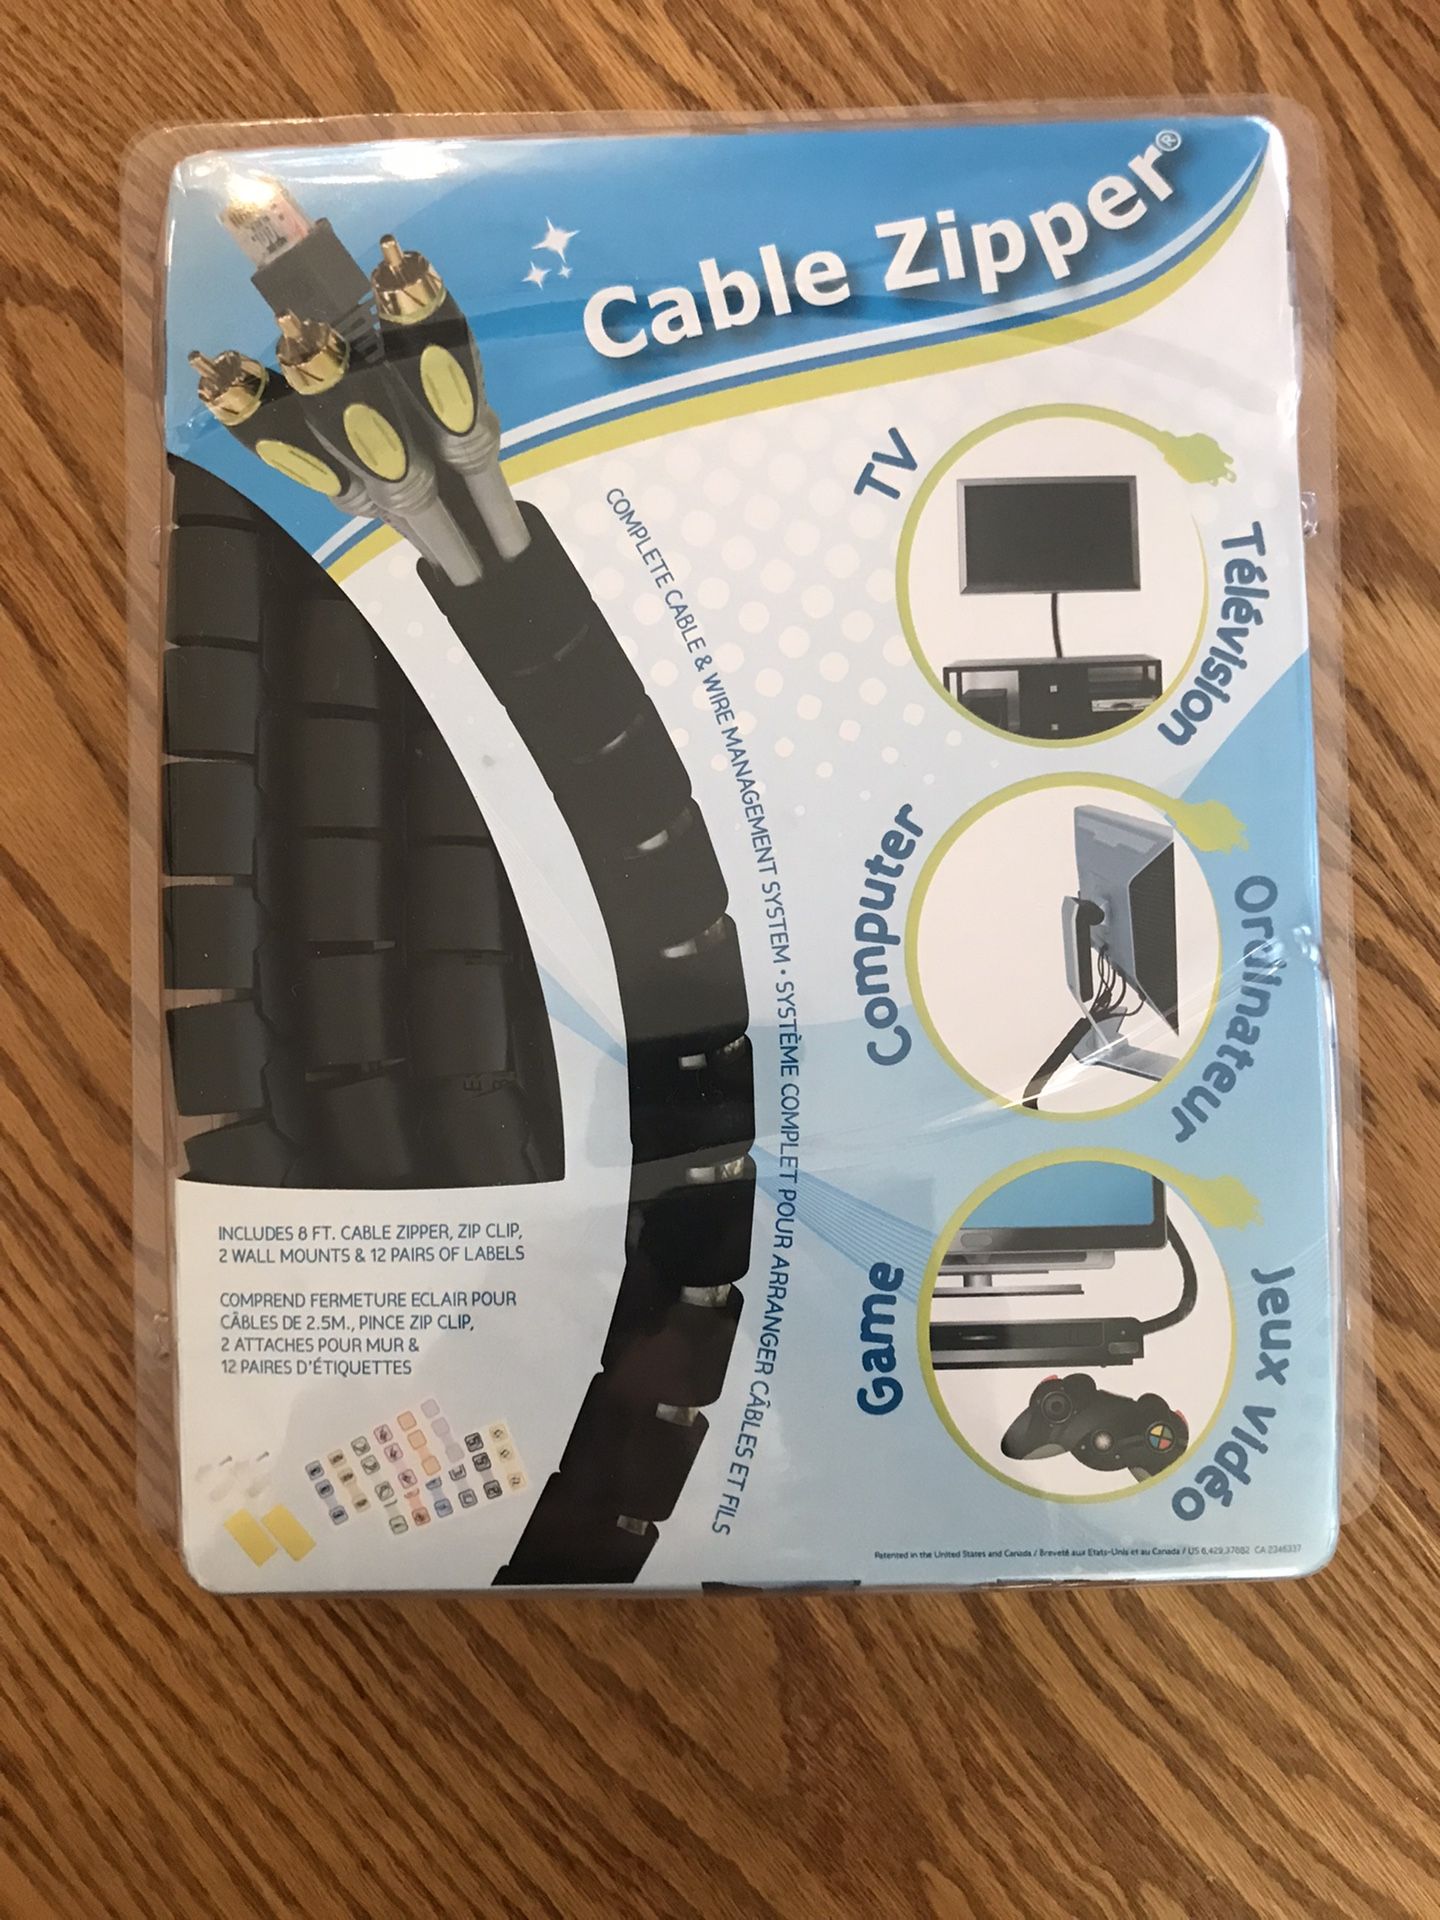 Cable zipper (to Organize Cables)